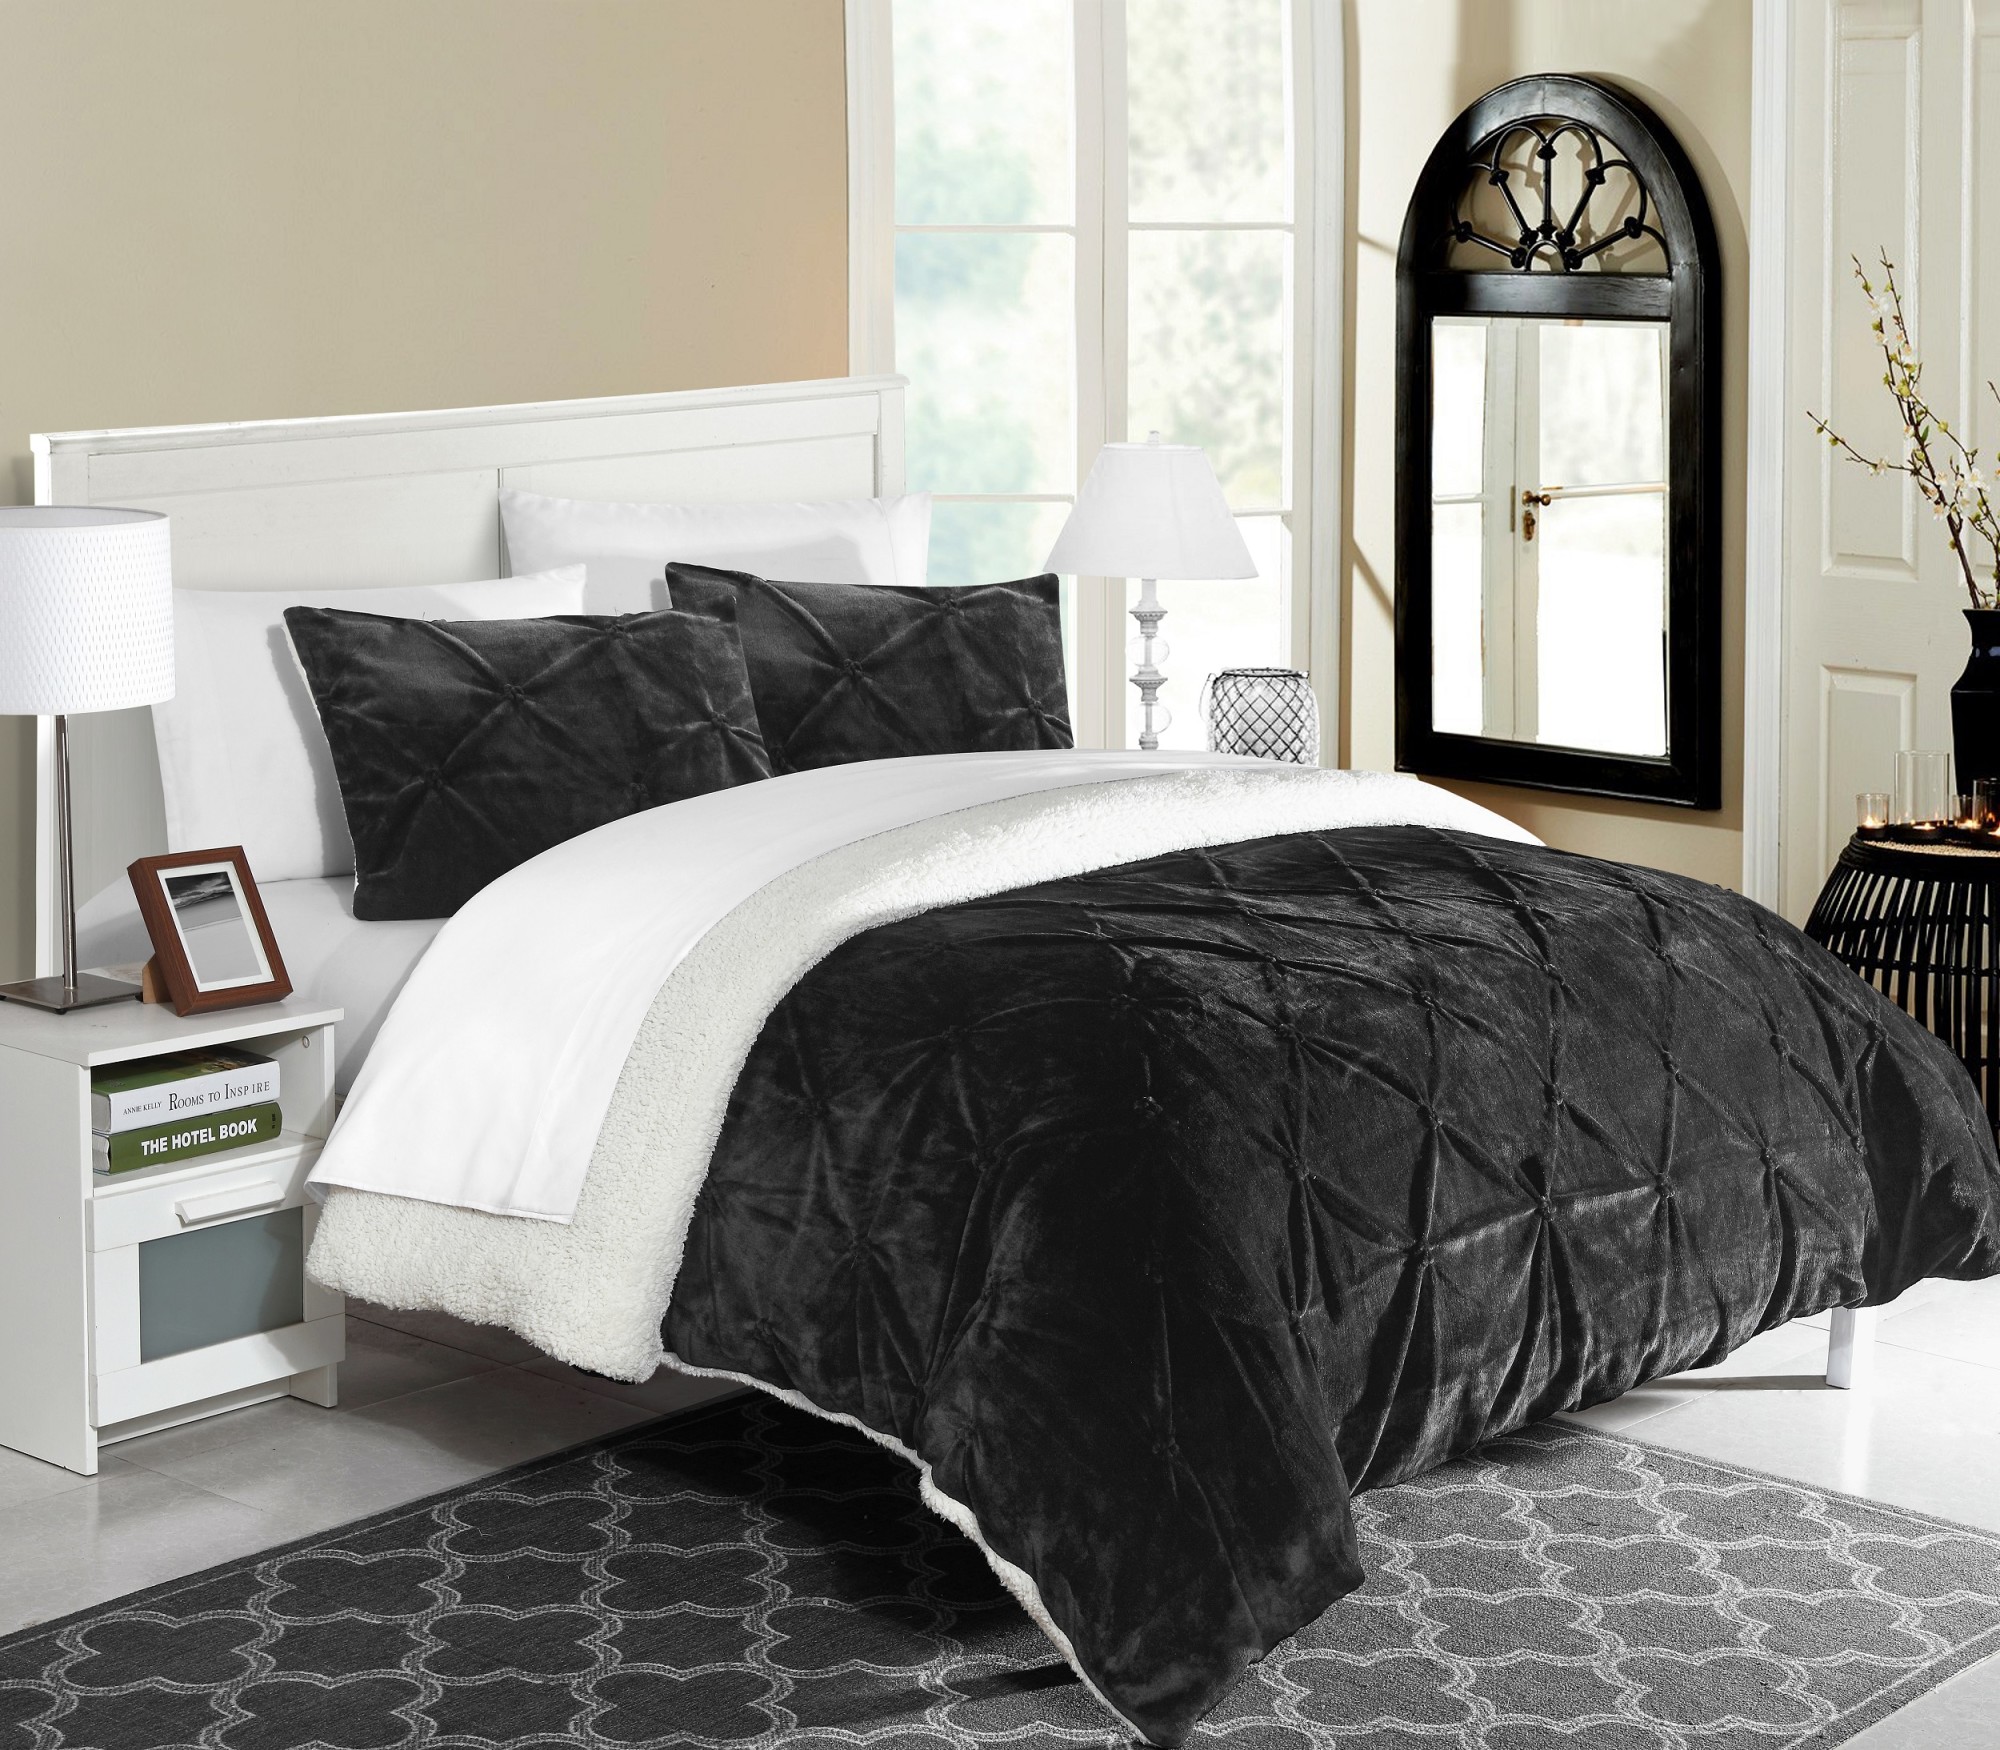 Chic Home Chiara 7 Piece Bed in a Bag Comforter Set